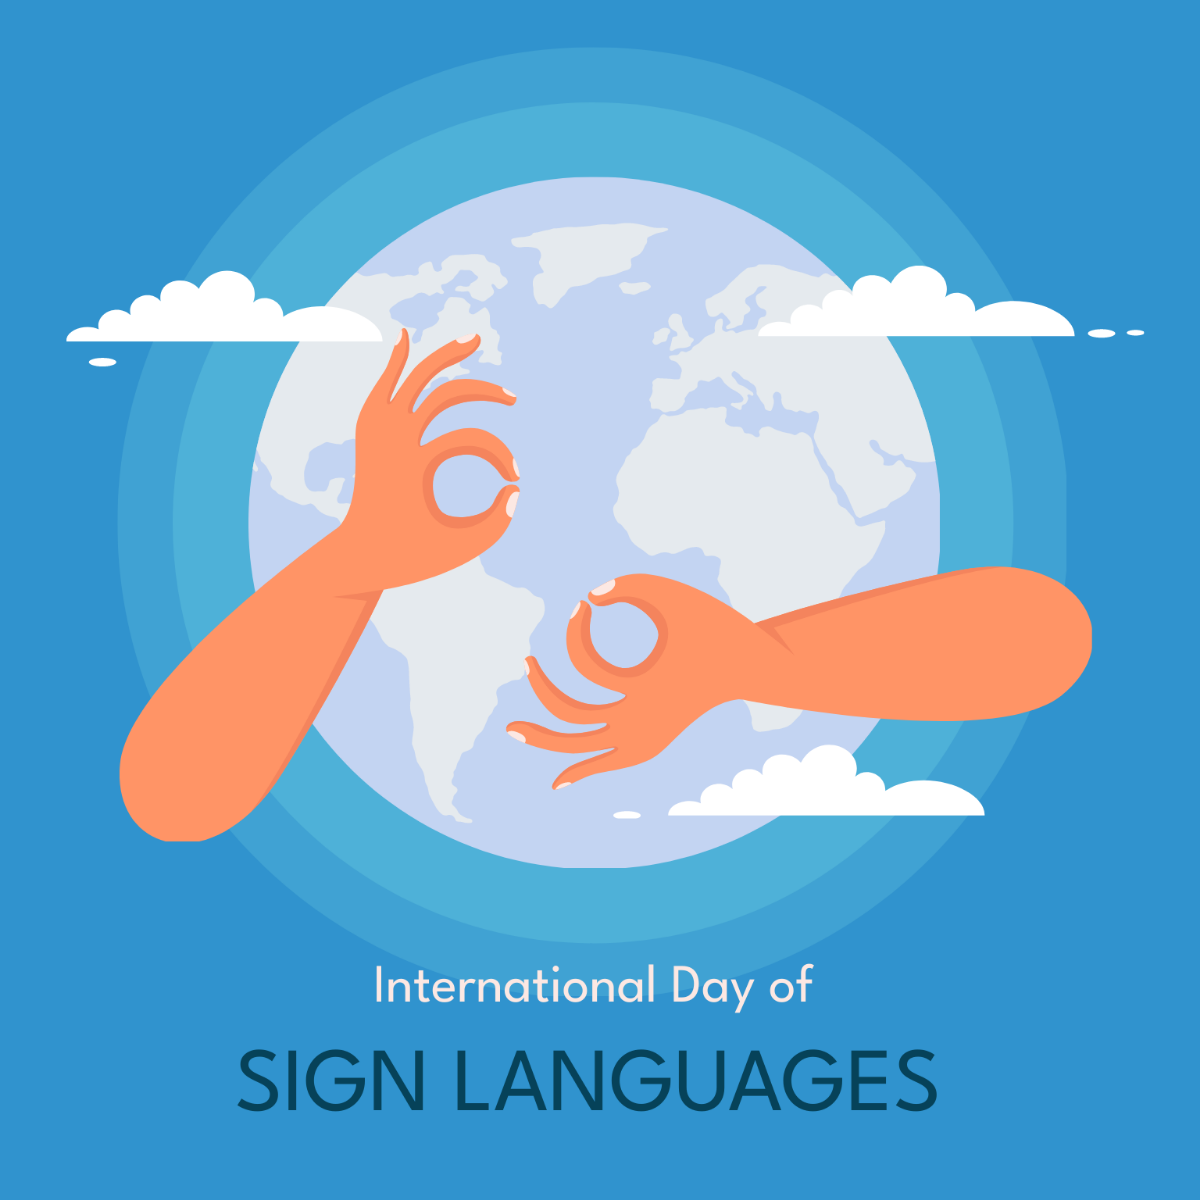 Free International Day of Sign Languages Vector Template